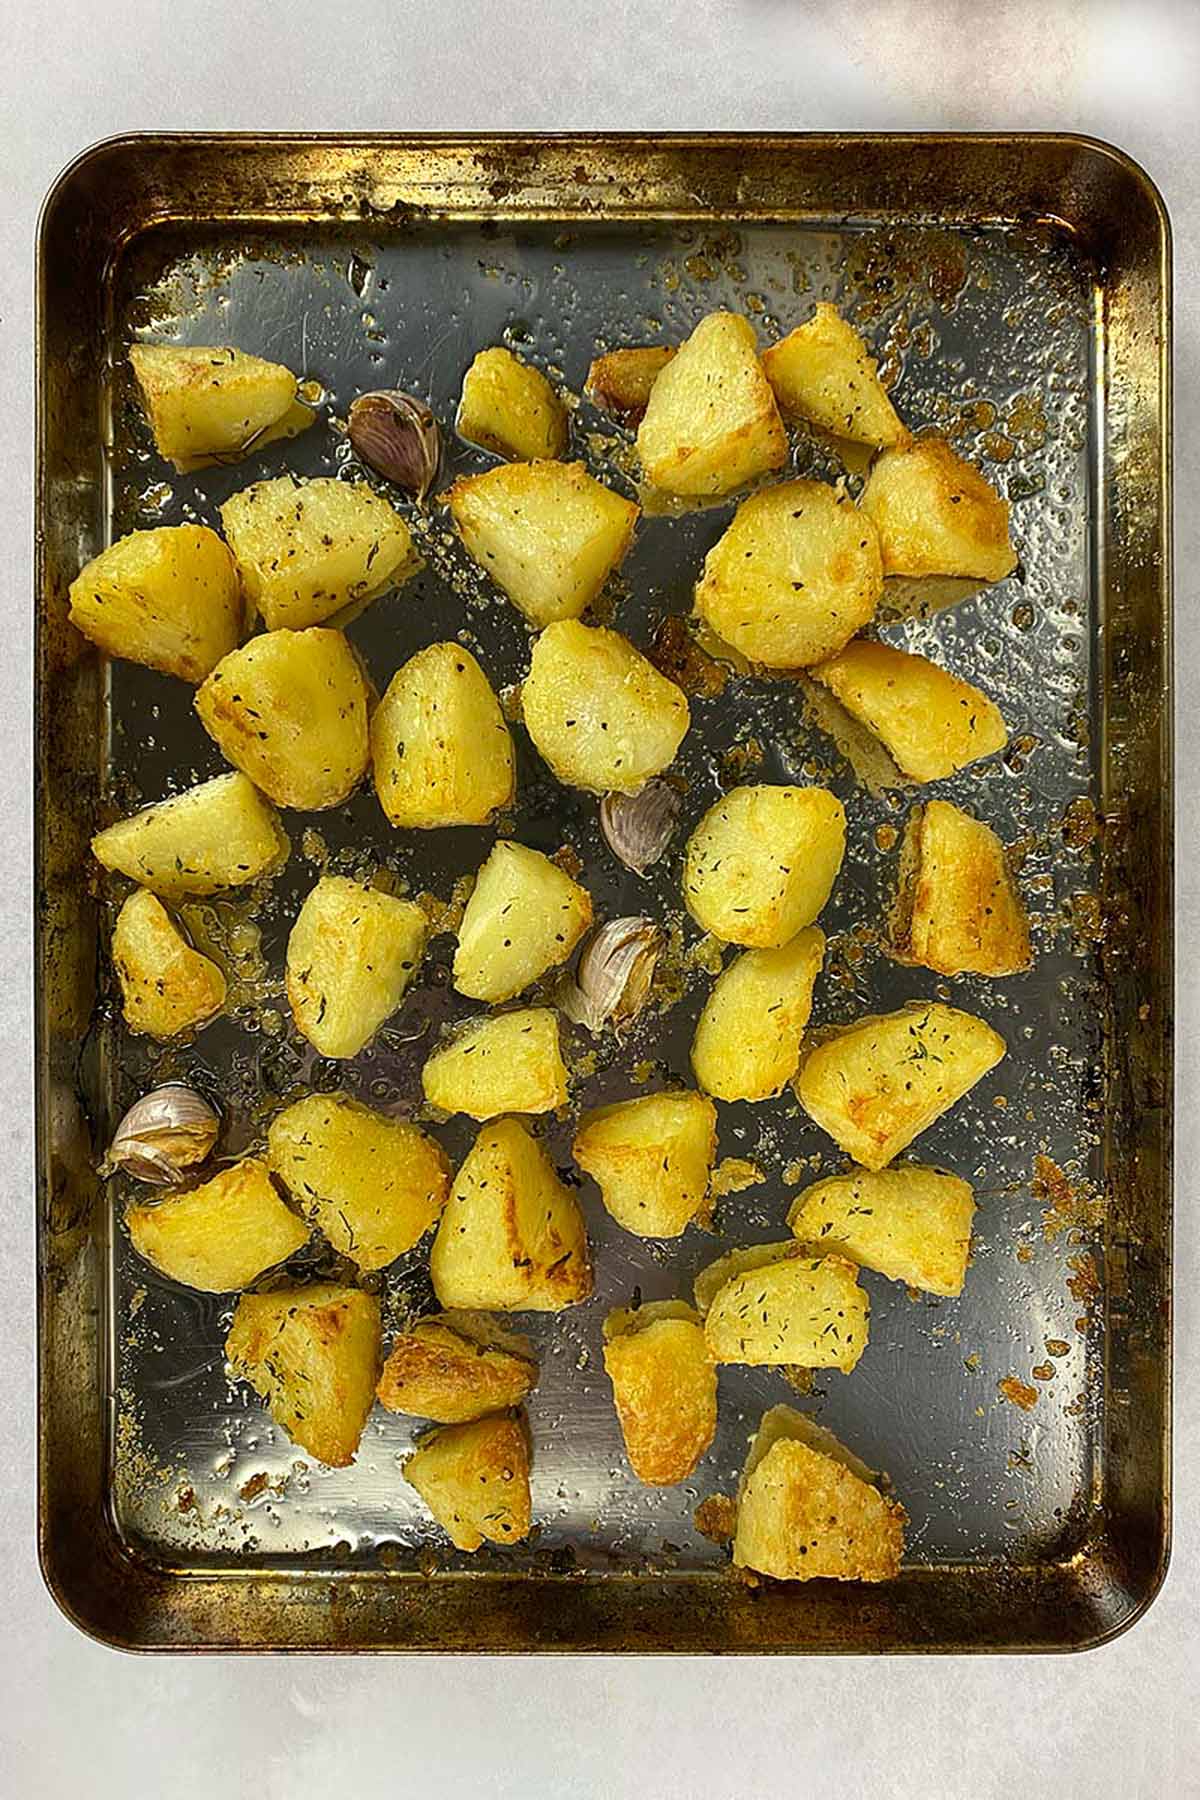 Roasted potatoes on a baking sheet with some cloves of garlic.